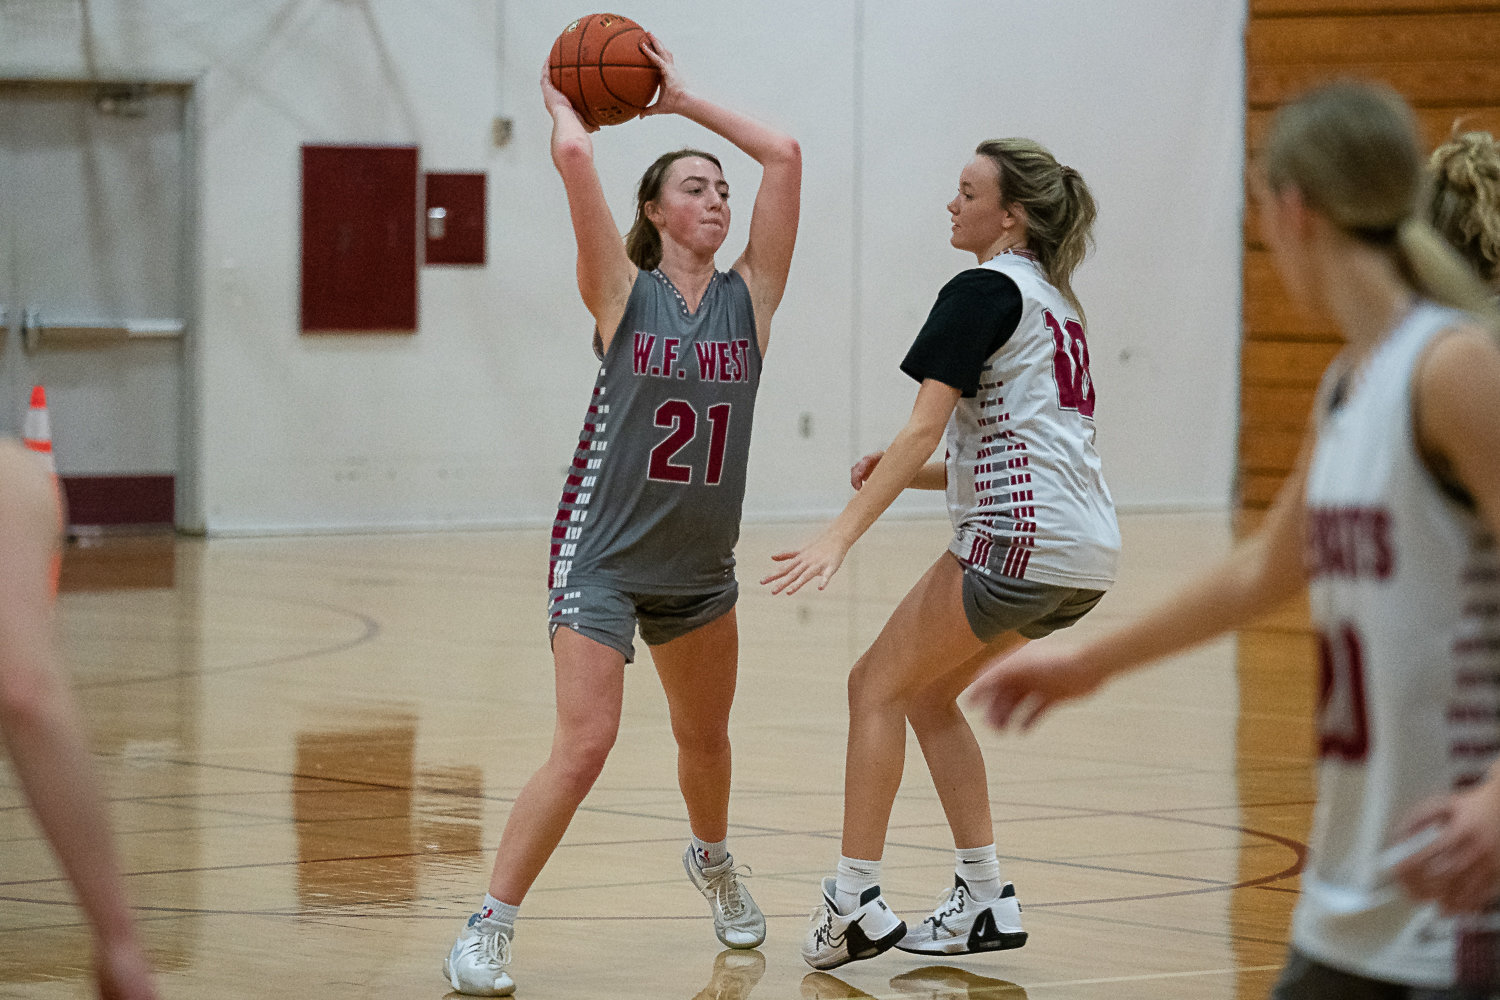 W.F. West forward Morgan Rogerson passes inside to a teammate during practice Nov. 22.